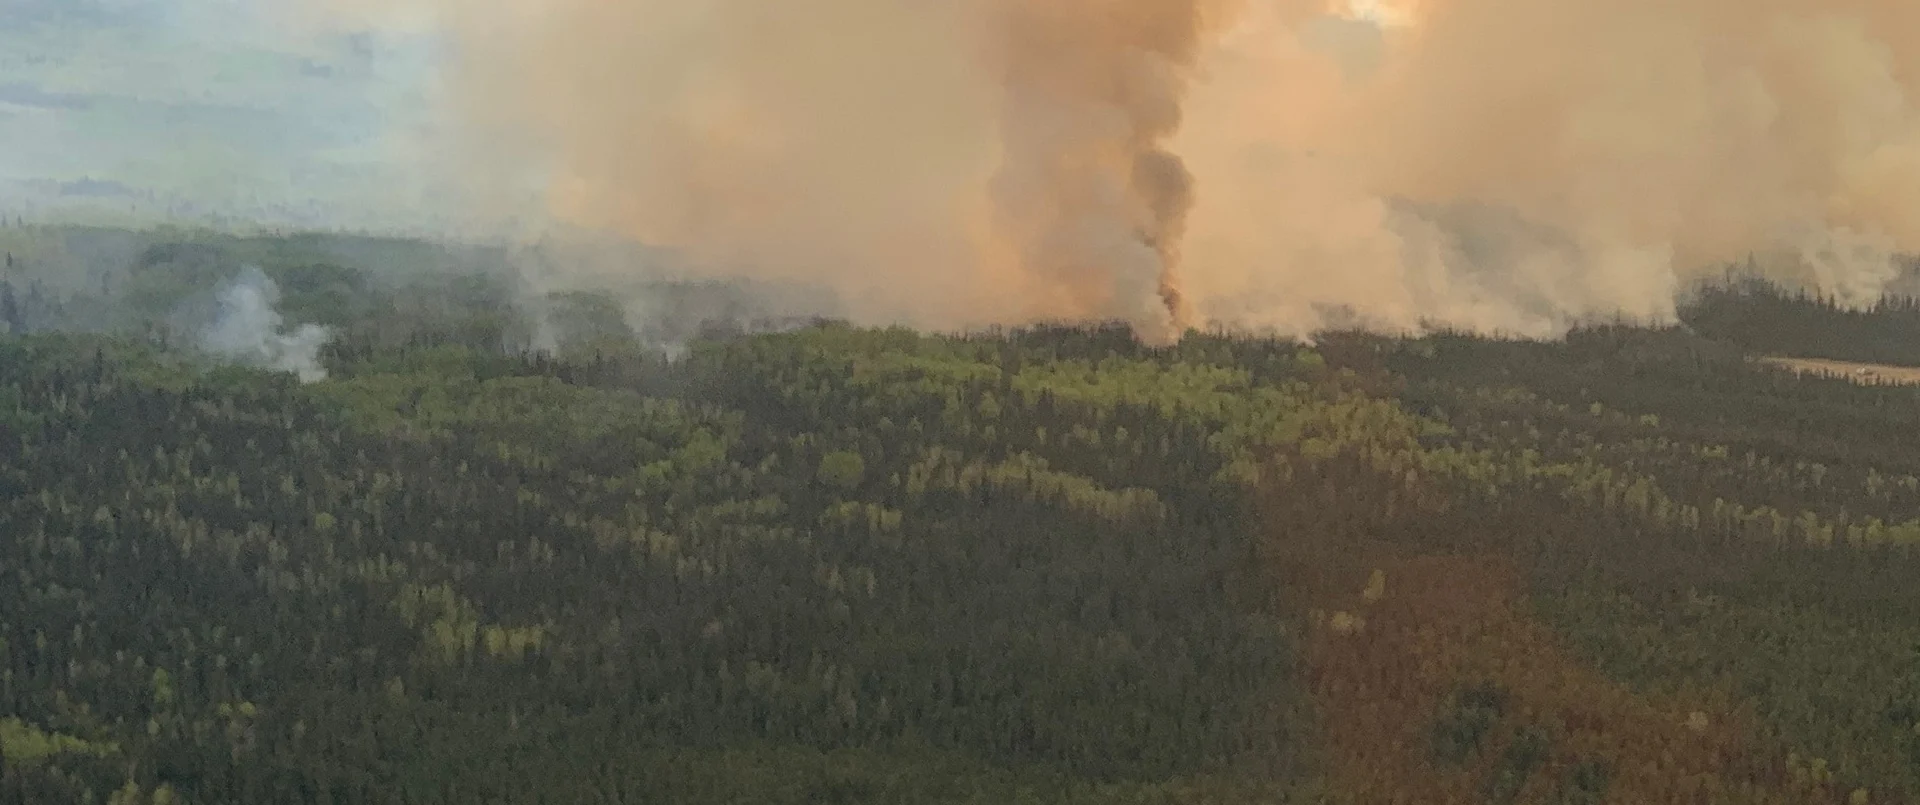 Pilot dead after helicopter fighting wildfire crashes in northwestern Alberta